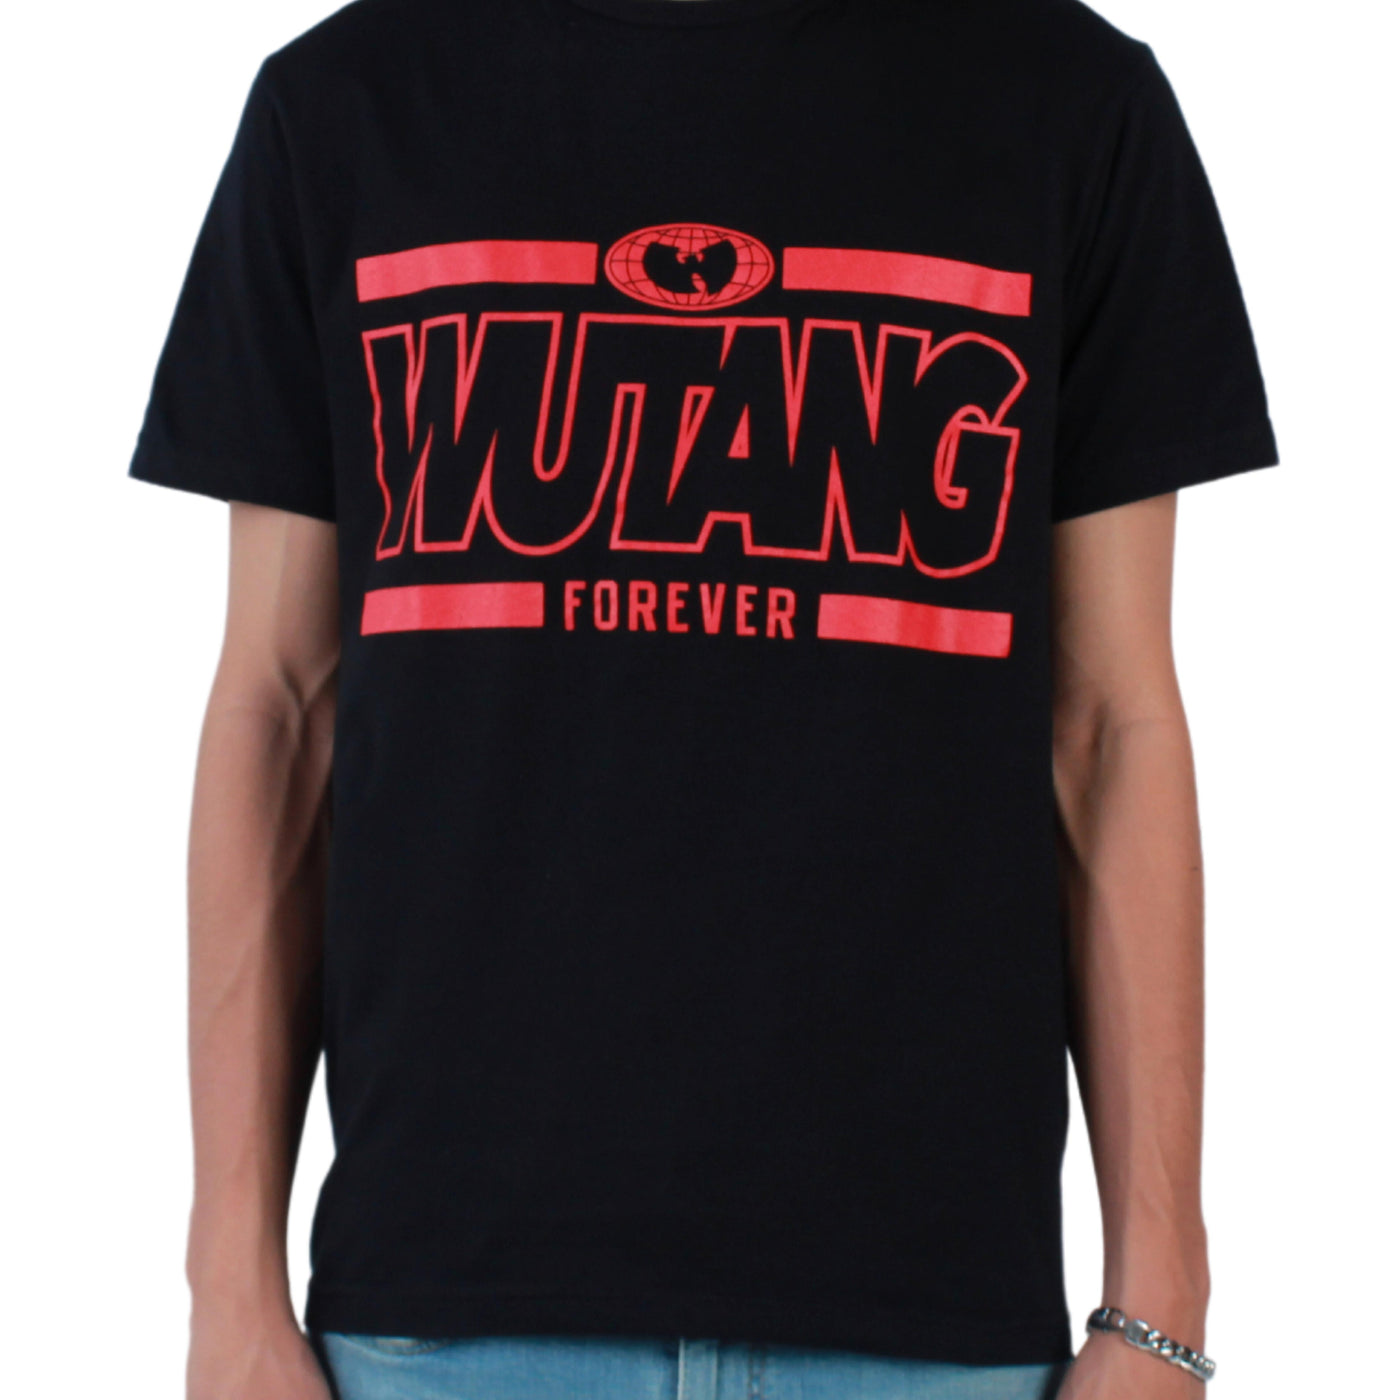 WuTang Forever Red and Black Tee